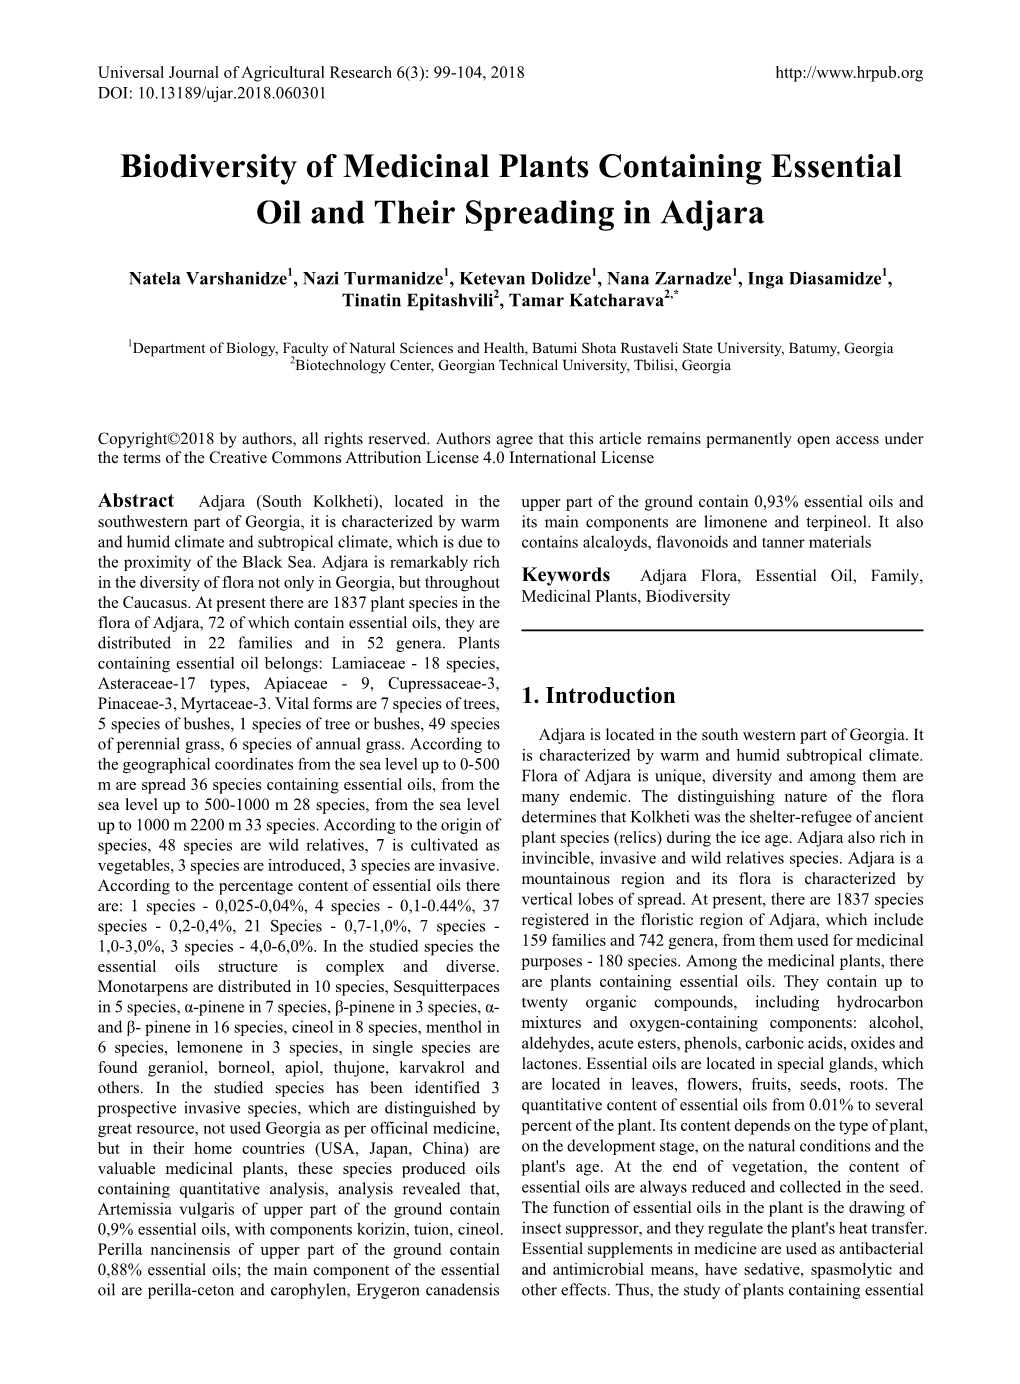 Biodiversity of Medicinal Plants Containing Essential Oil and Their Spreading in Adjara